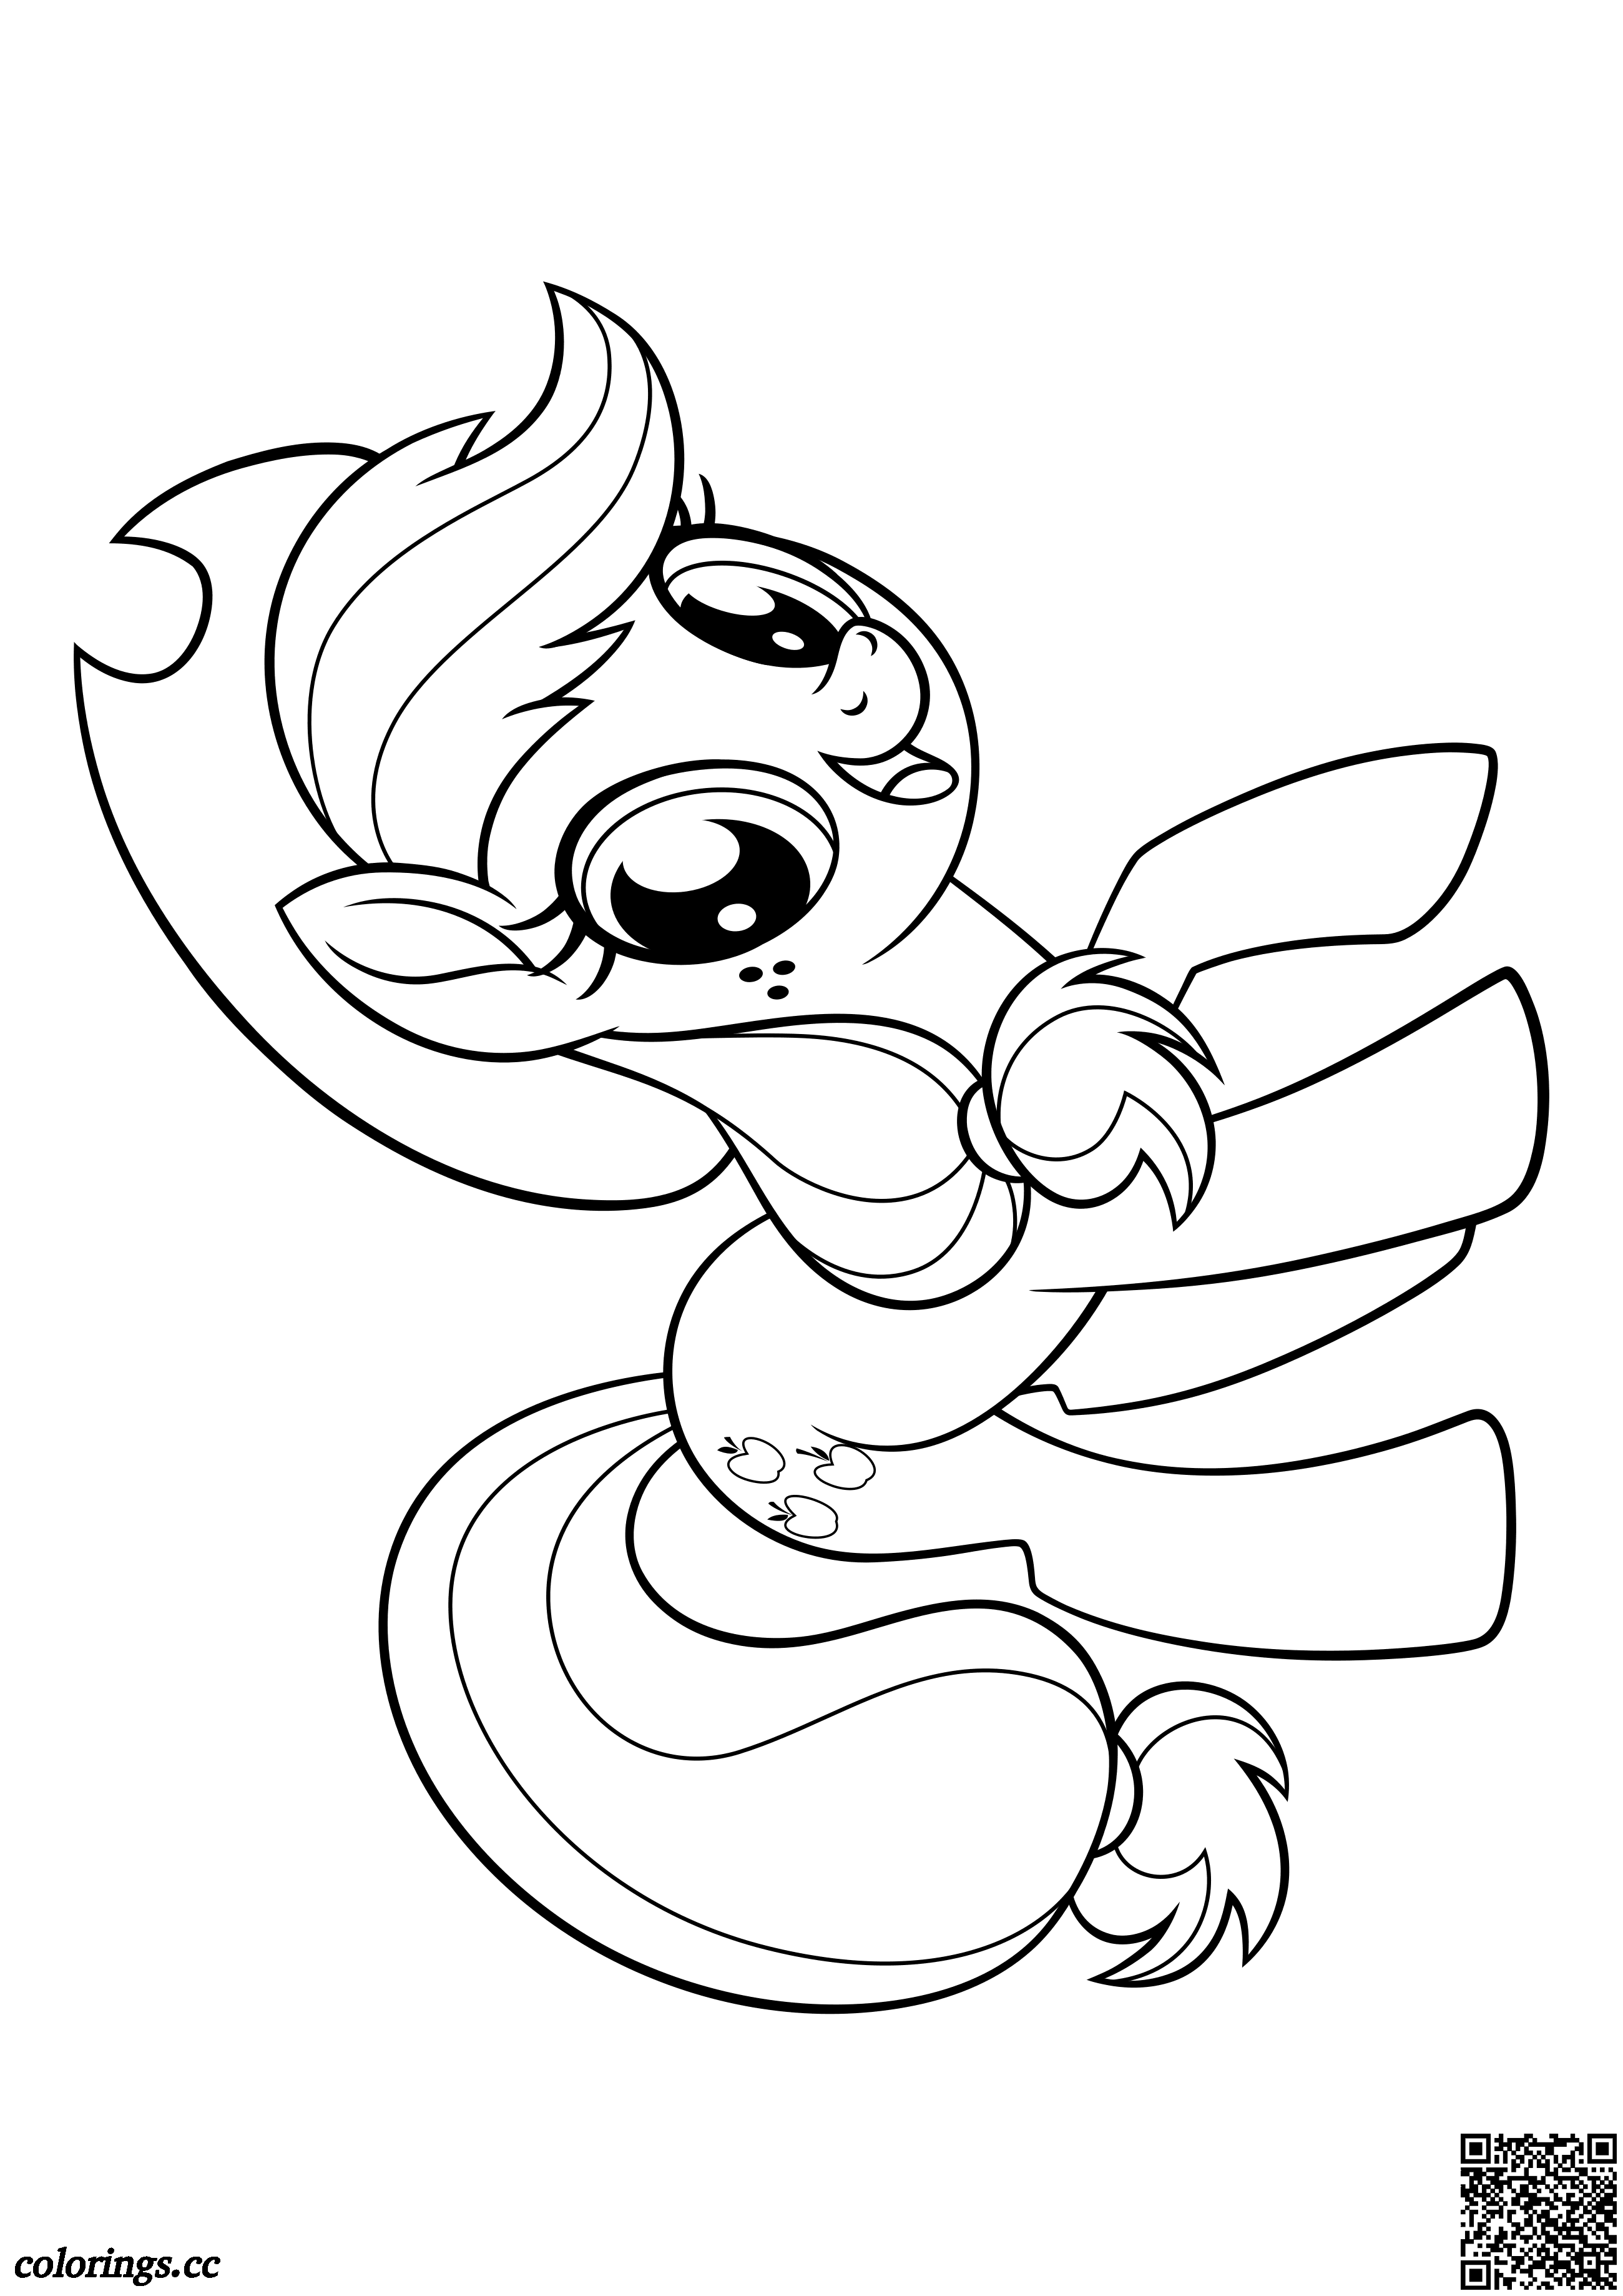 My Little Pony Applejack Coloring Pages My Little Pony Movie Coloring Pages Colorings Cc